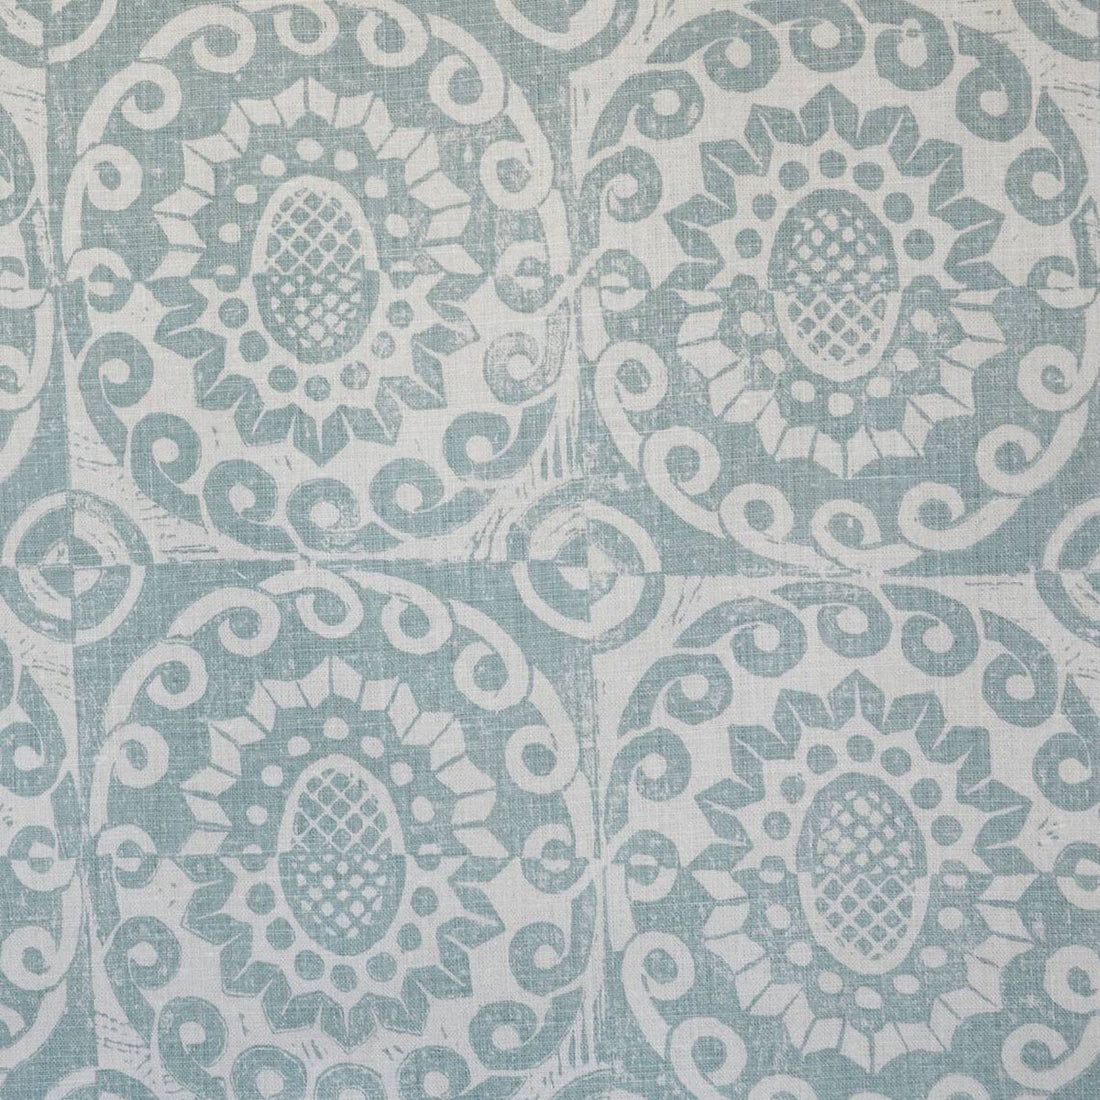 Pineapple On Oatmeal fabric in aqua color - pattern BFC-3628.3.0 - by Lee Jofa in the Blithfield collection